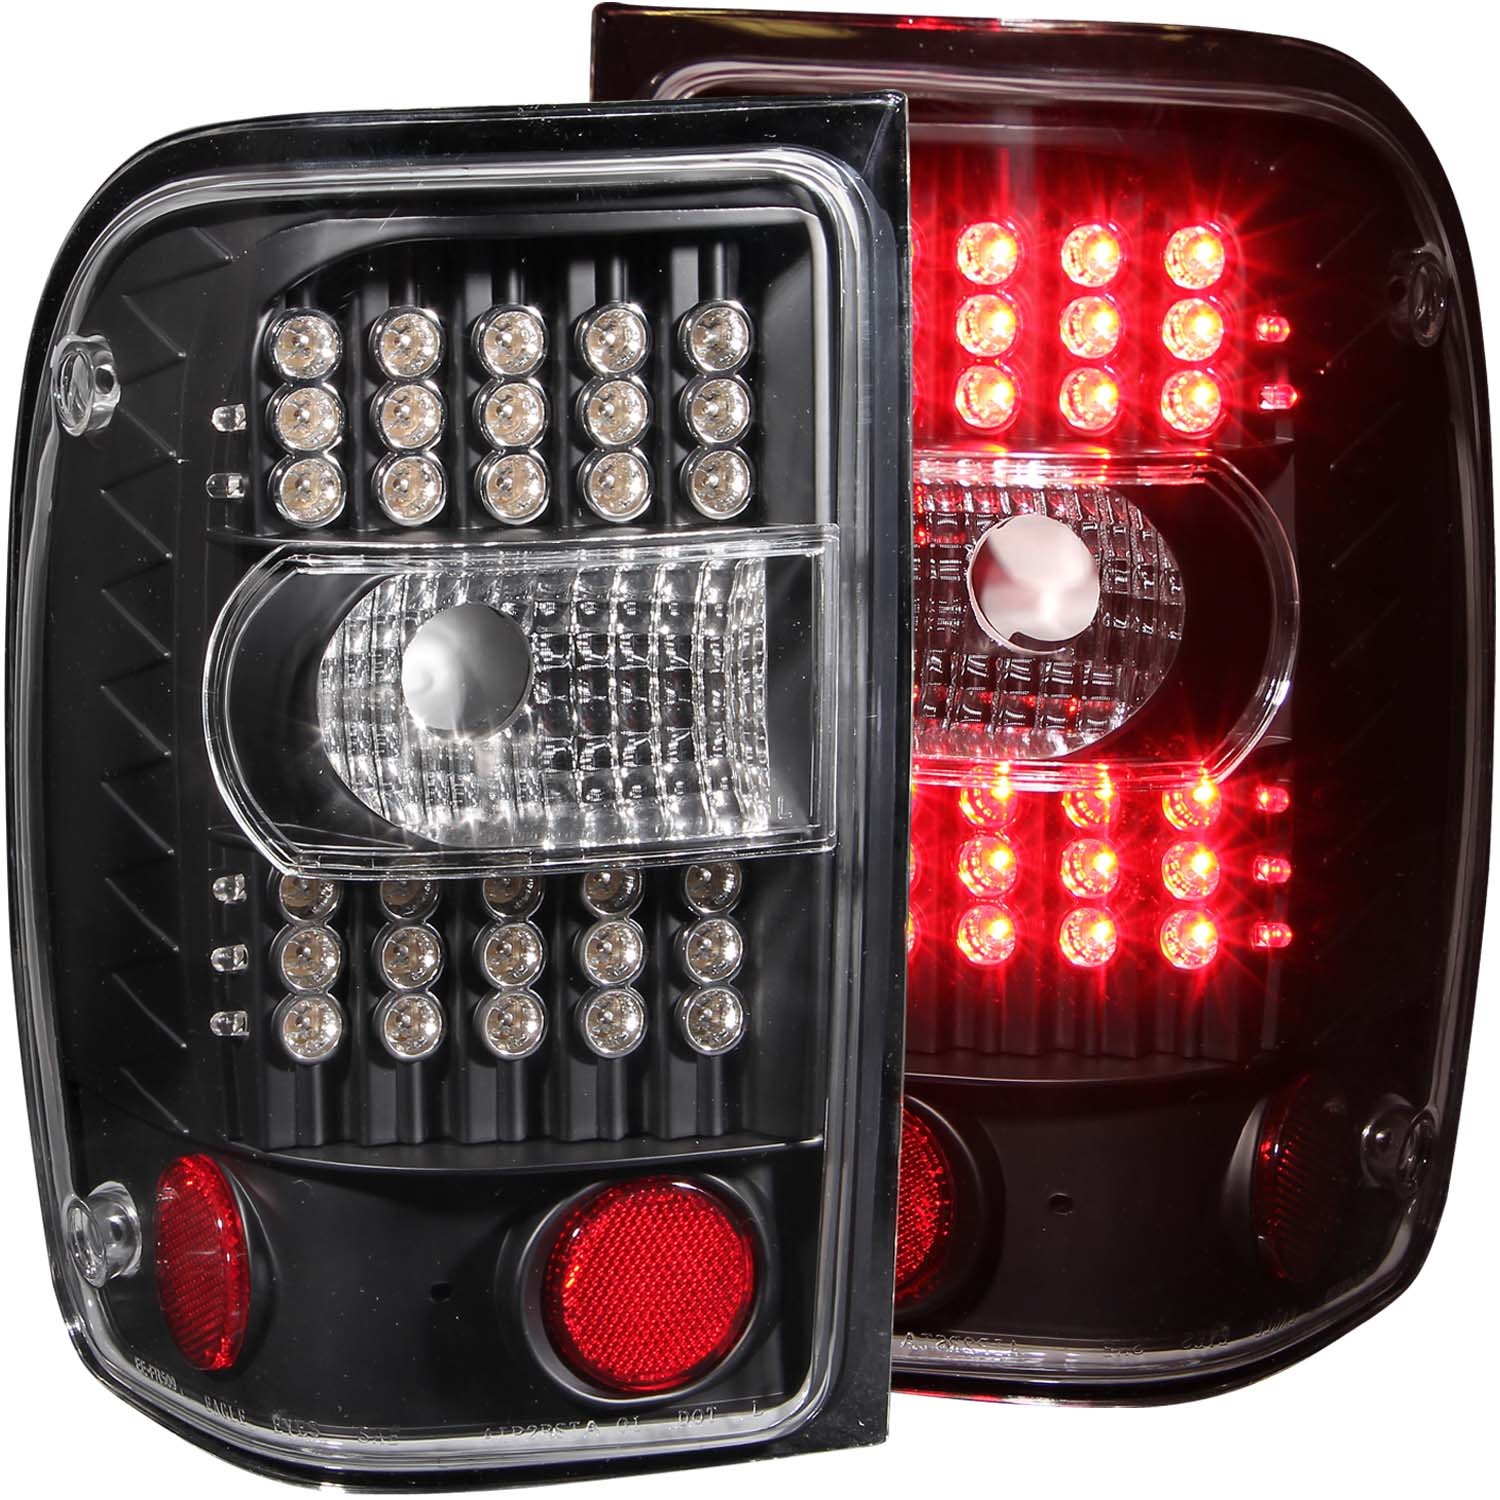 Anzo USA 311107 Tail Light Assembly Fits 01-11 Ranger